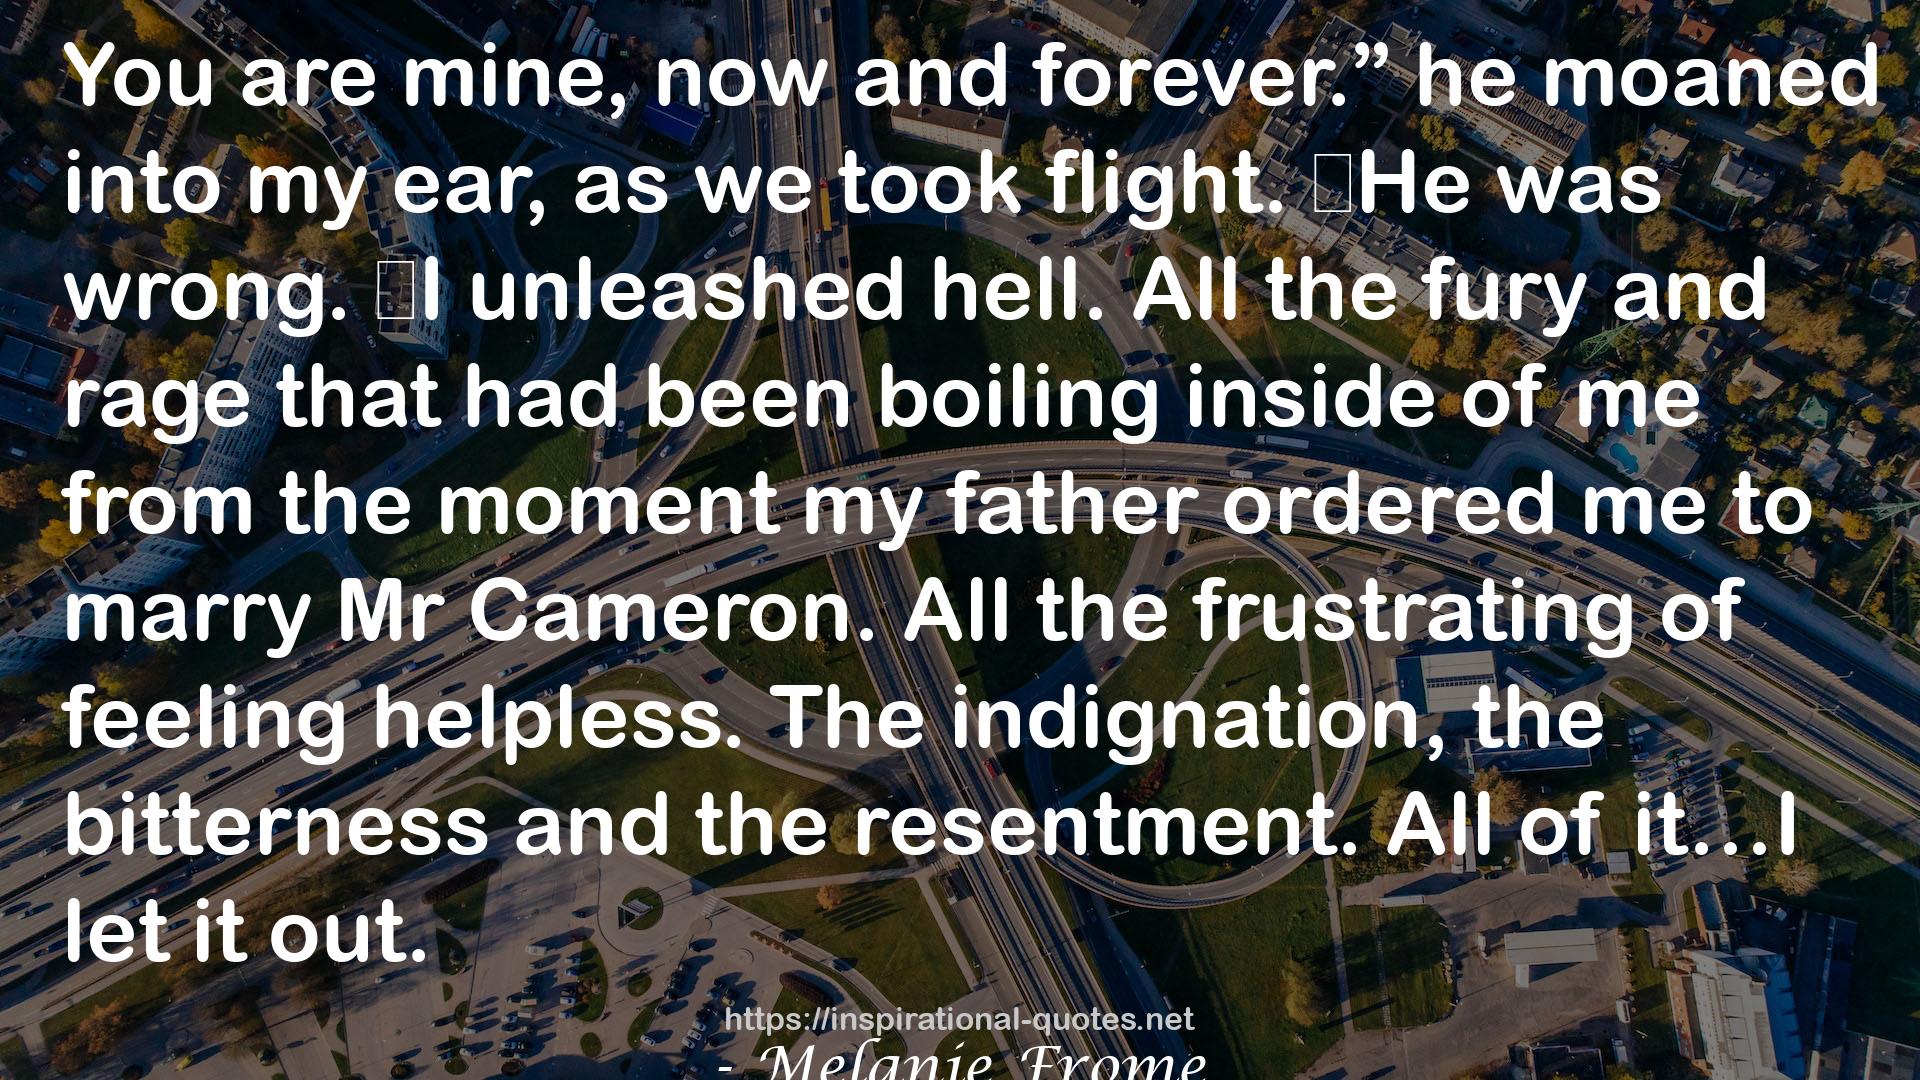 Melanie Frome QUOTES